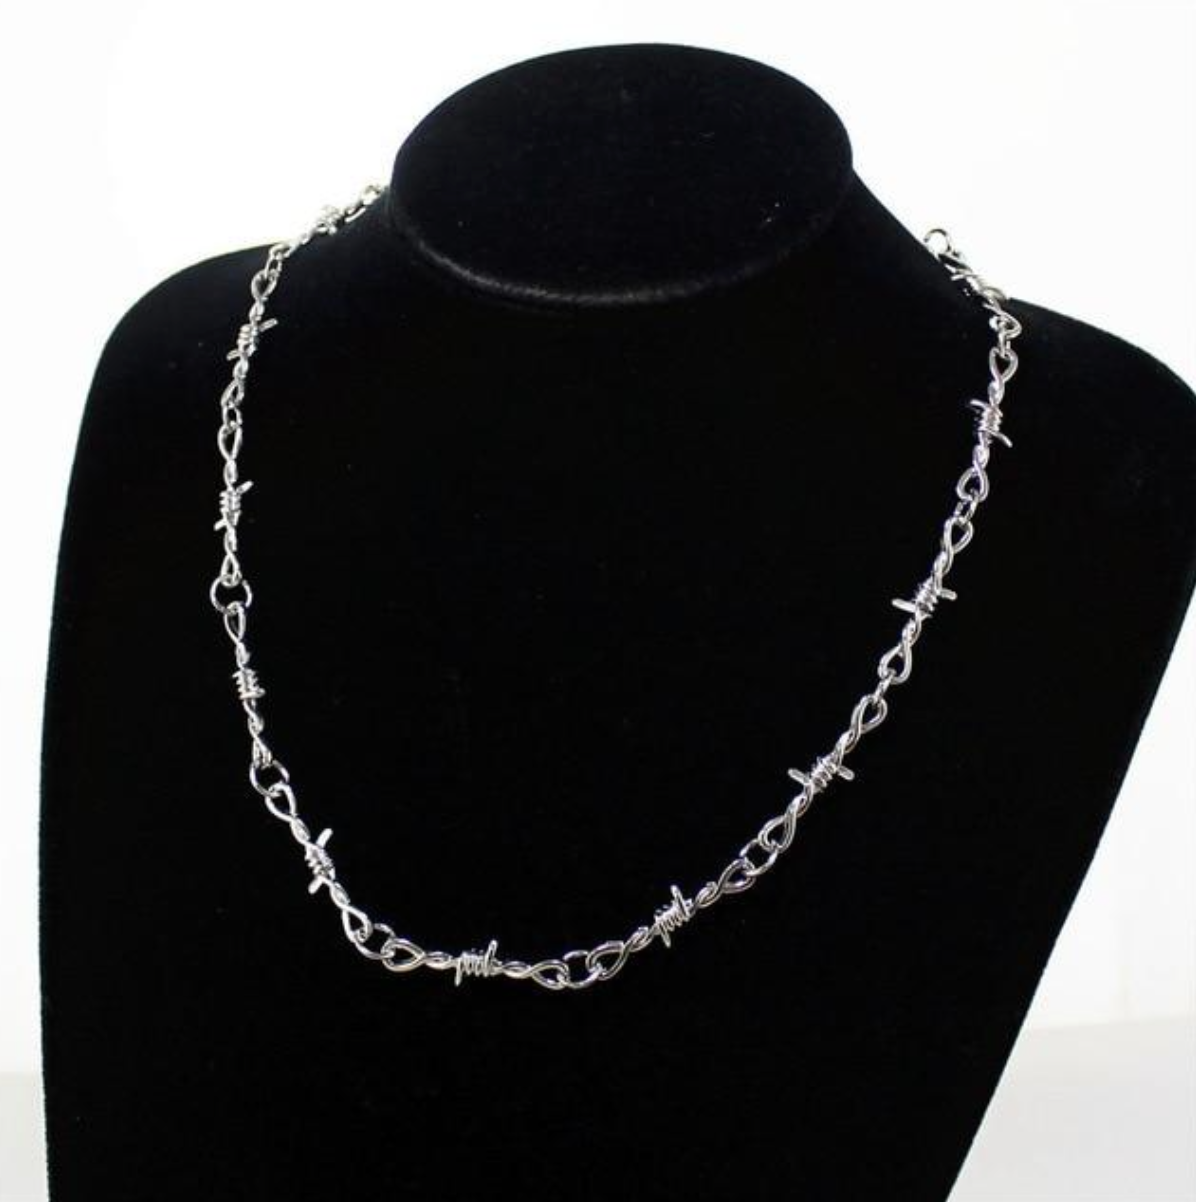 Barbed Wire Metallic Chain Necklace